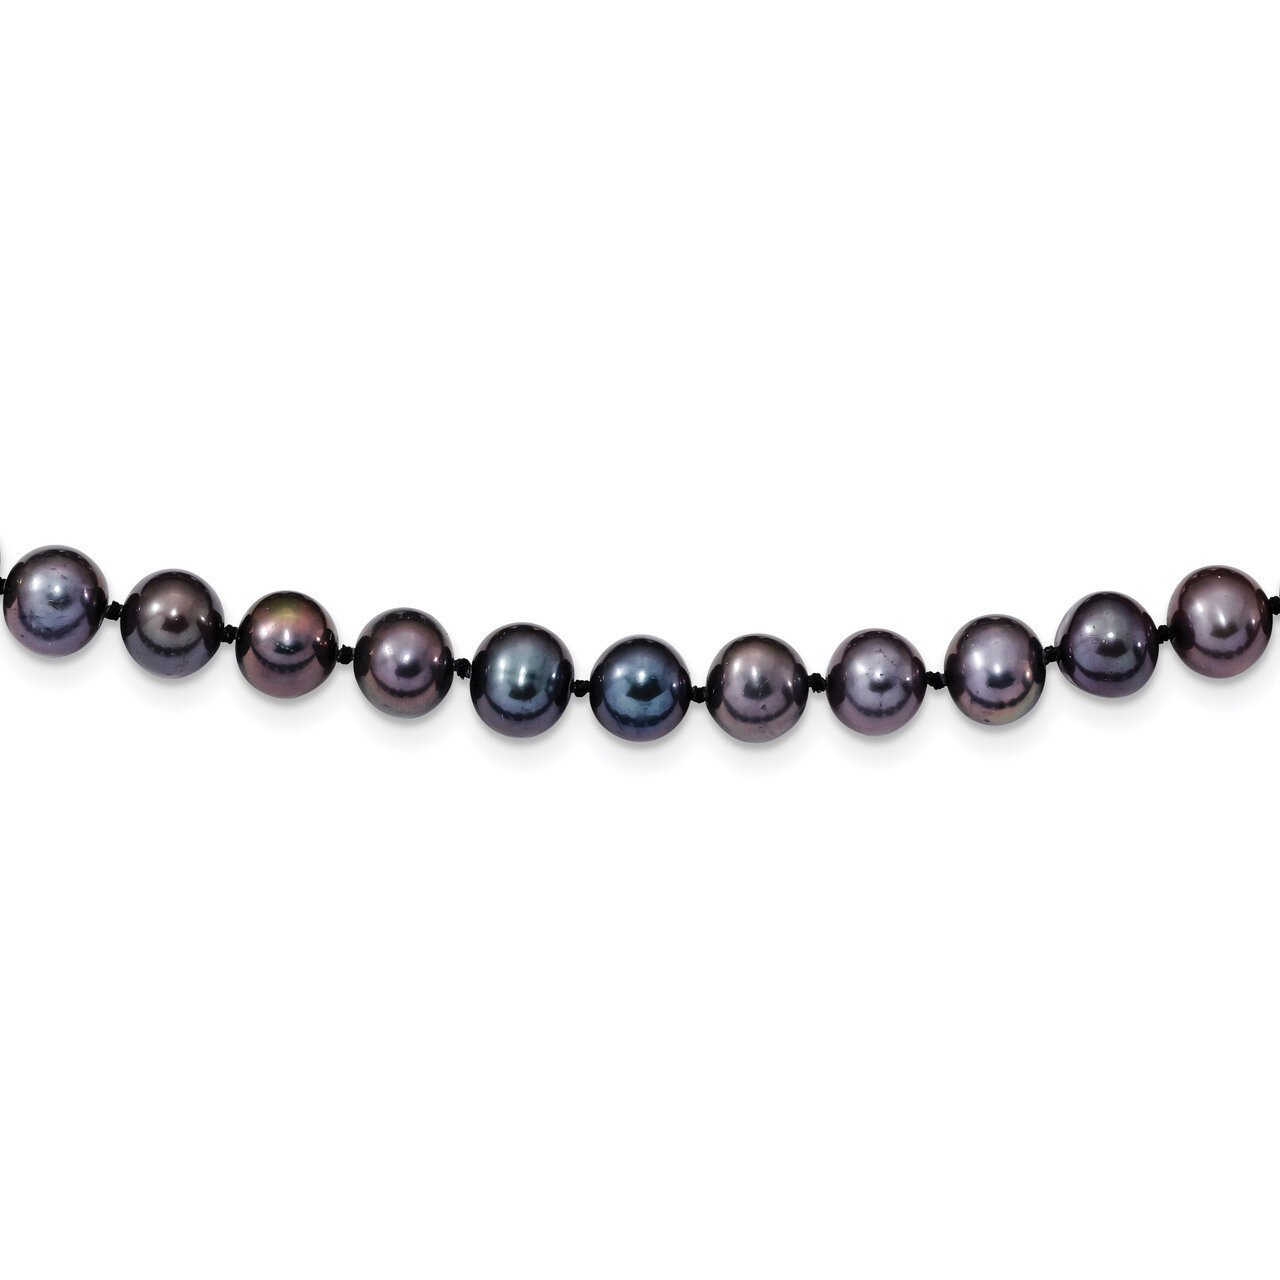 7-8mm Black Freshwater Cultured Pearl Necklace 24 Inch Sterling Silver Rhodium-plated QH5155-24